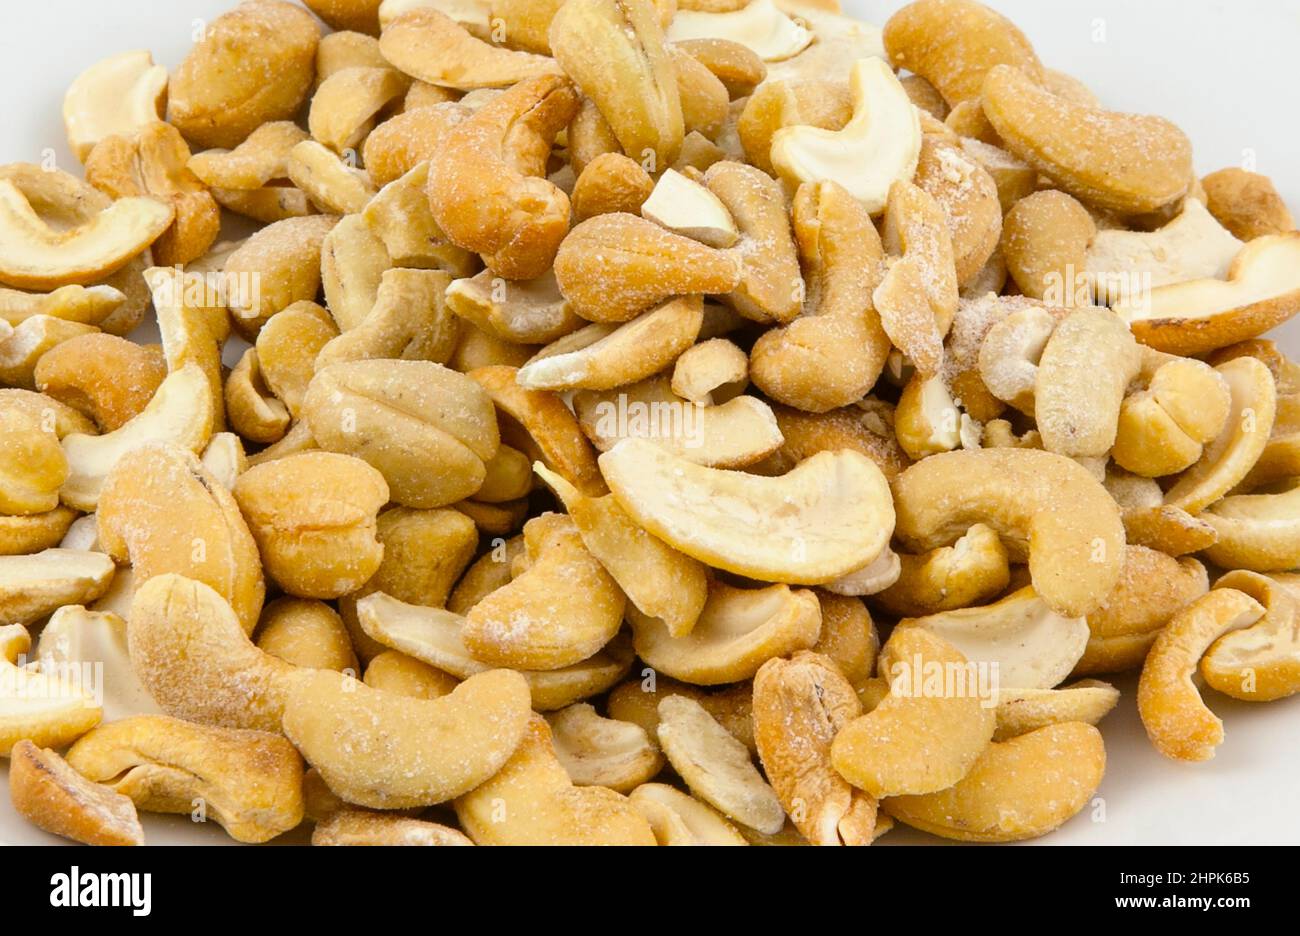 Food, Snacks, Roasted and salted Cashew nuts. Stock Photo